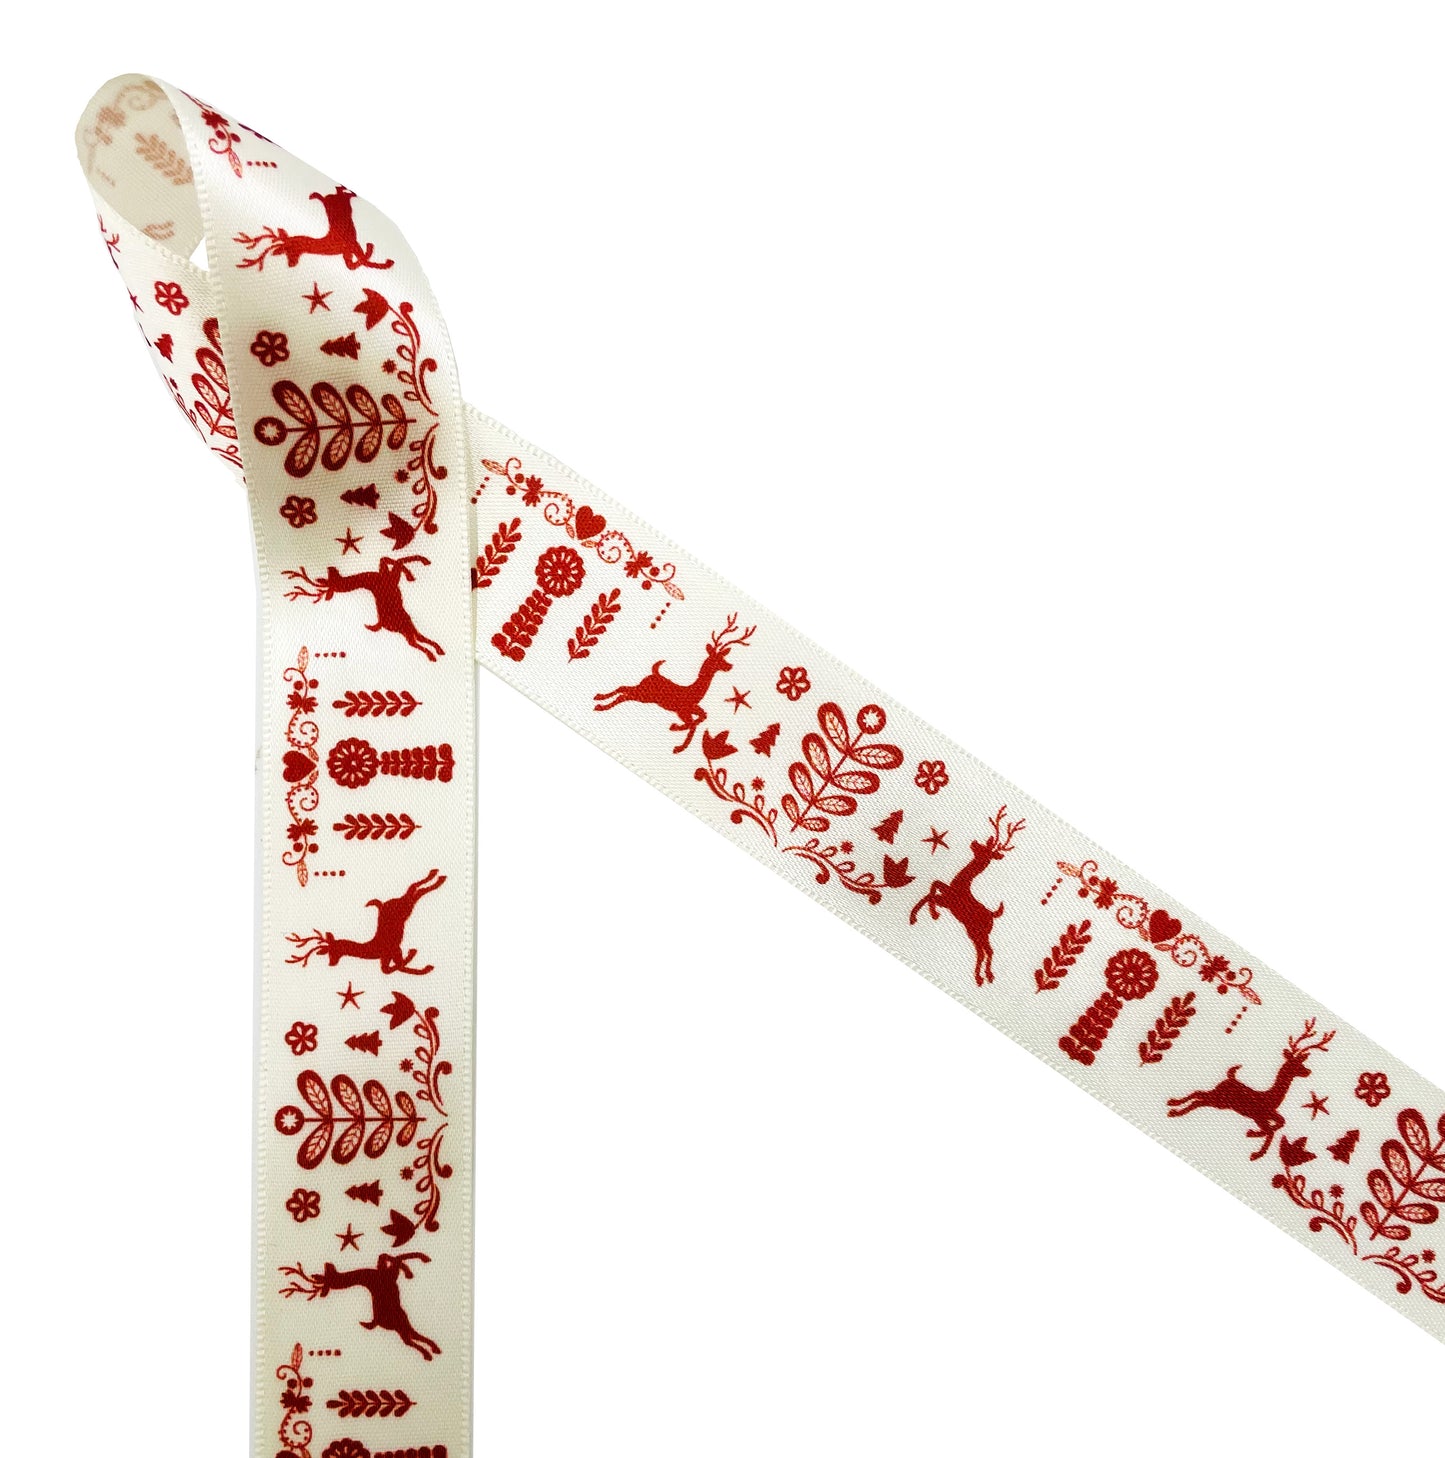 Nordic Pattern Ribbon in red on 5/8" and 7/8" Antique White Face Satin Ribbon